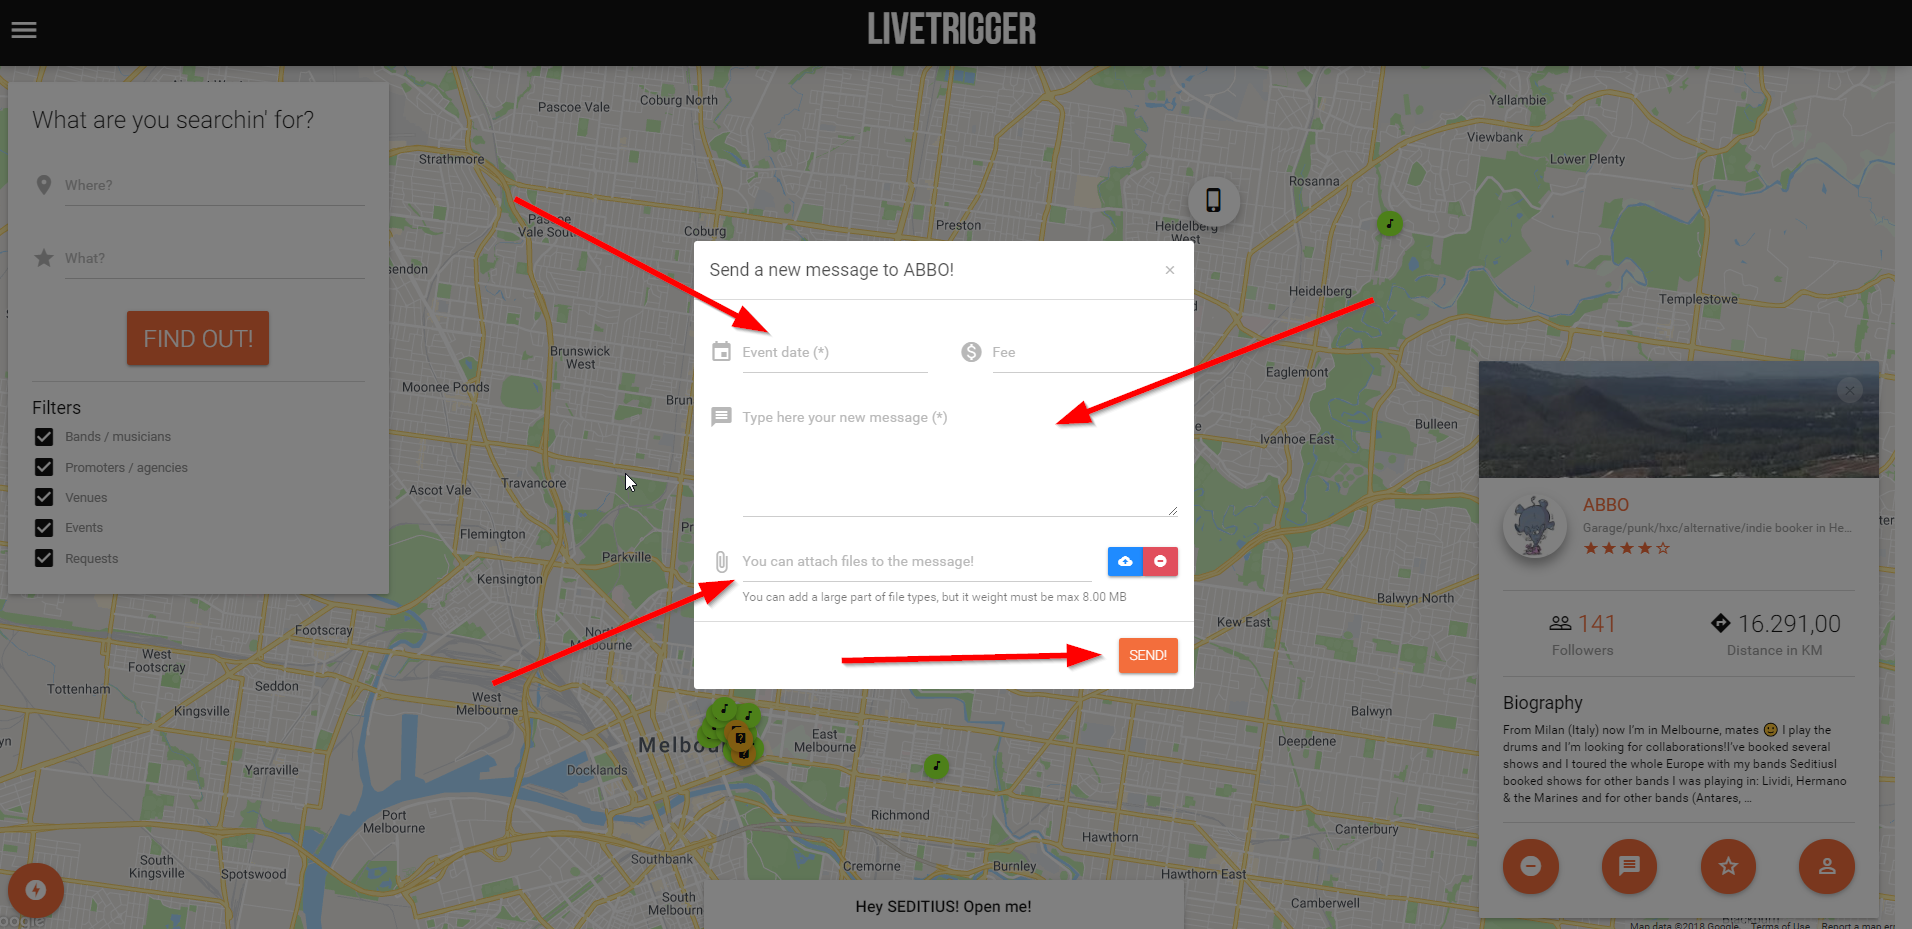 You can send a private message to abbo using the message box on LiveTrigger